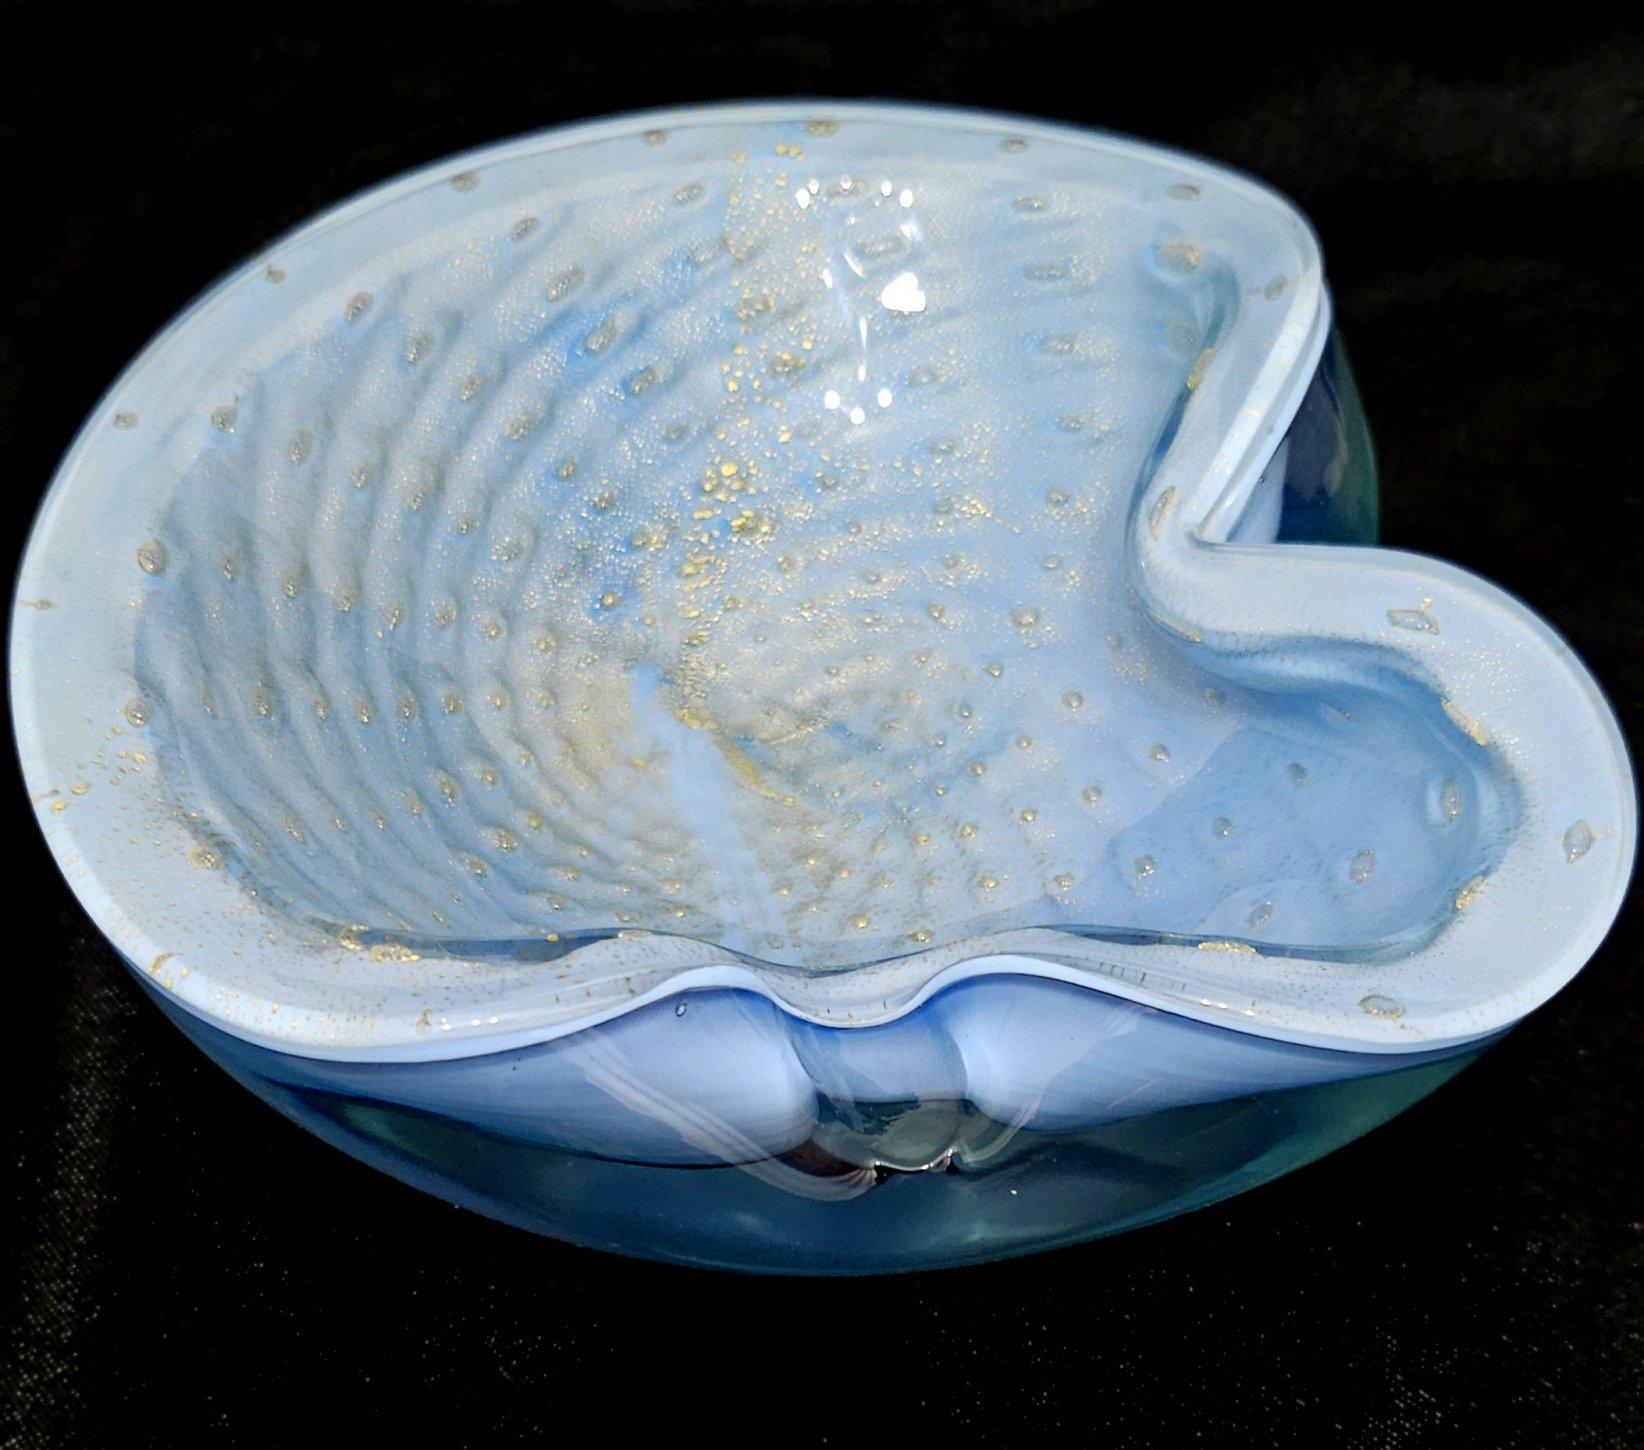 Murano Glass Bullicante Bowl / Vide Poche with Gold Polveri, Alfredo Barbini likely
Very much like Barbini's work; there are one or two other maestros of that era who made similar works, but we believe it's Barbini.
Measures about 6 x 2 inches.
No